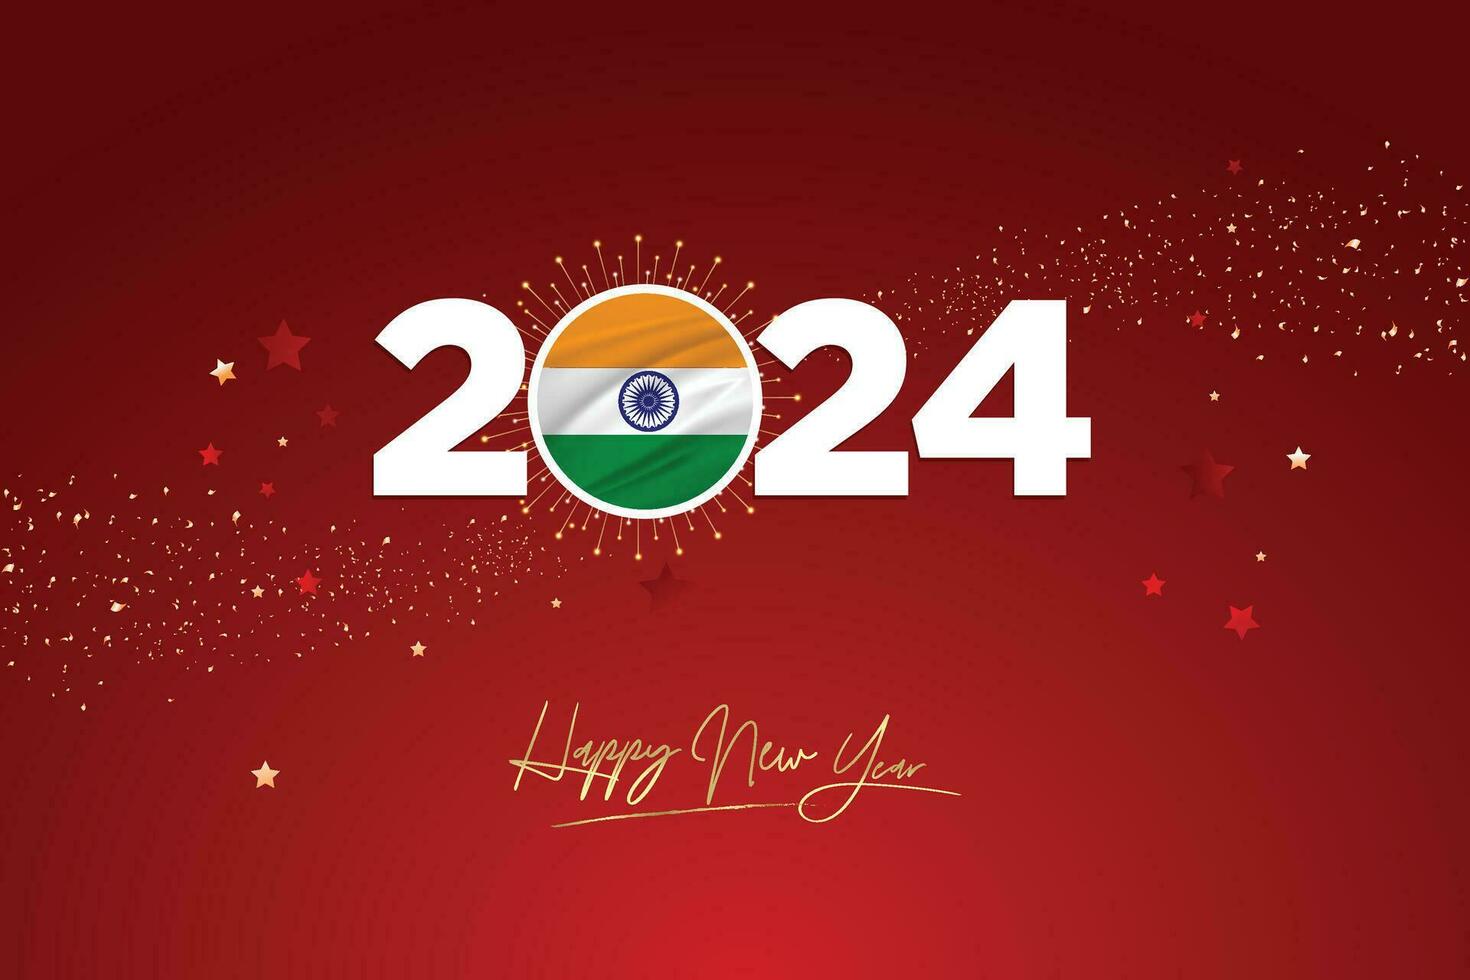 Colorful Happy New Year Festival Design Banner, New Year 2024 Logo with Indian Flag on Red-Maroon Confetti and star Background, Calendar 2024, Social Media New Year Banner, Post Card, Greetings vector